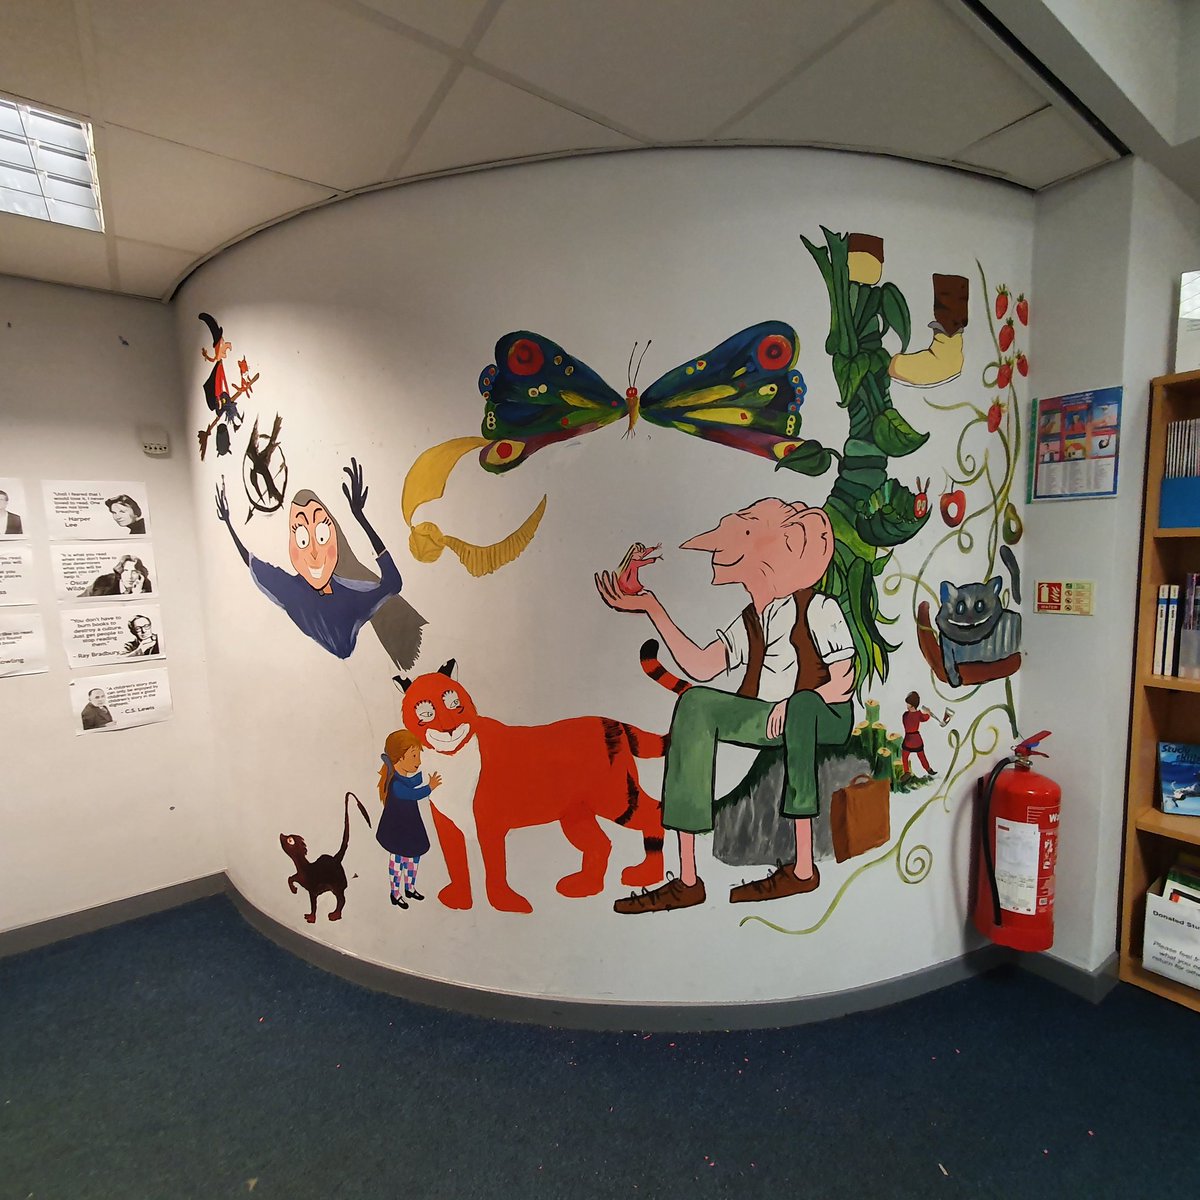 Still a work in progress but just had to share our library mural, created by our amazing @WACExpArts team and students.  Isn't it fab? @WhitburnAC @fvwlriclit @scottishbktrust @GreatSchLibs @LoveWestLothian #mural #favouritebooks #librarydisplay #painting